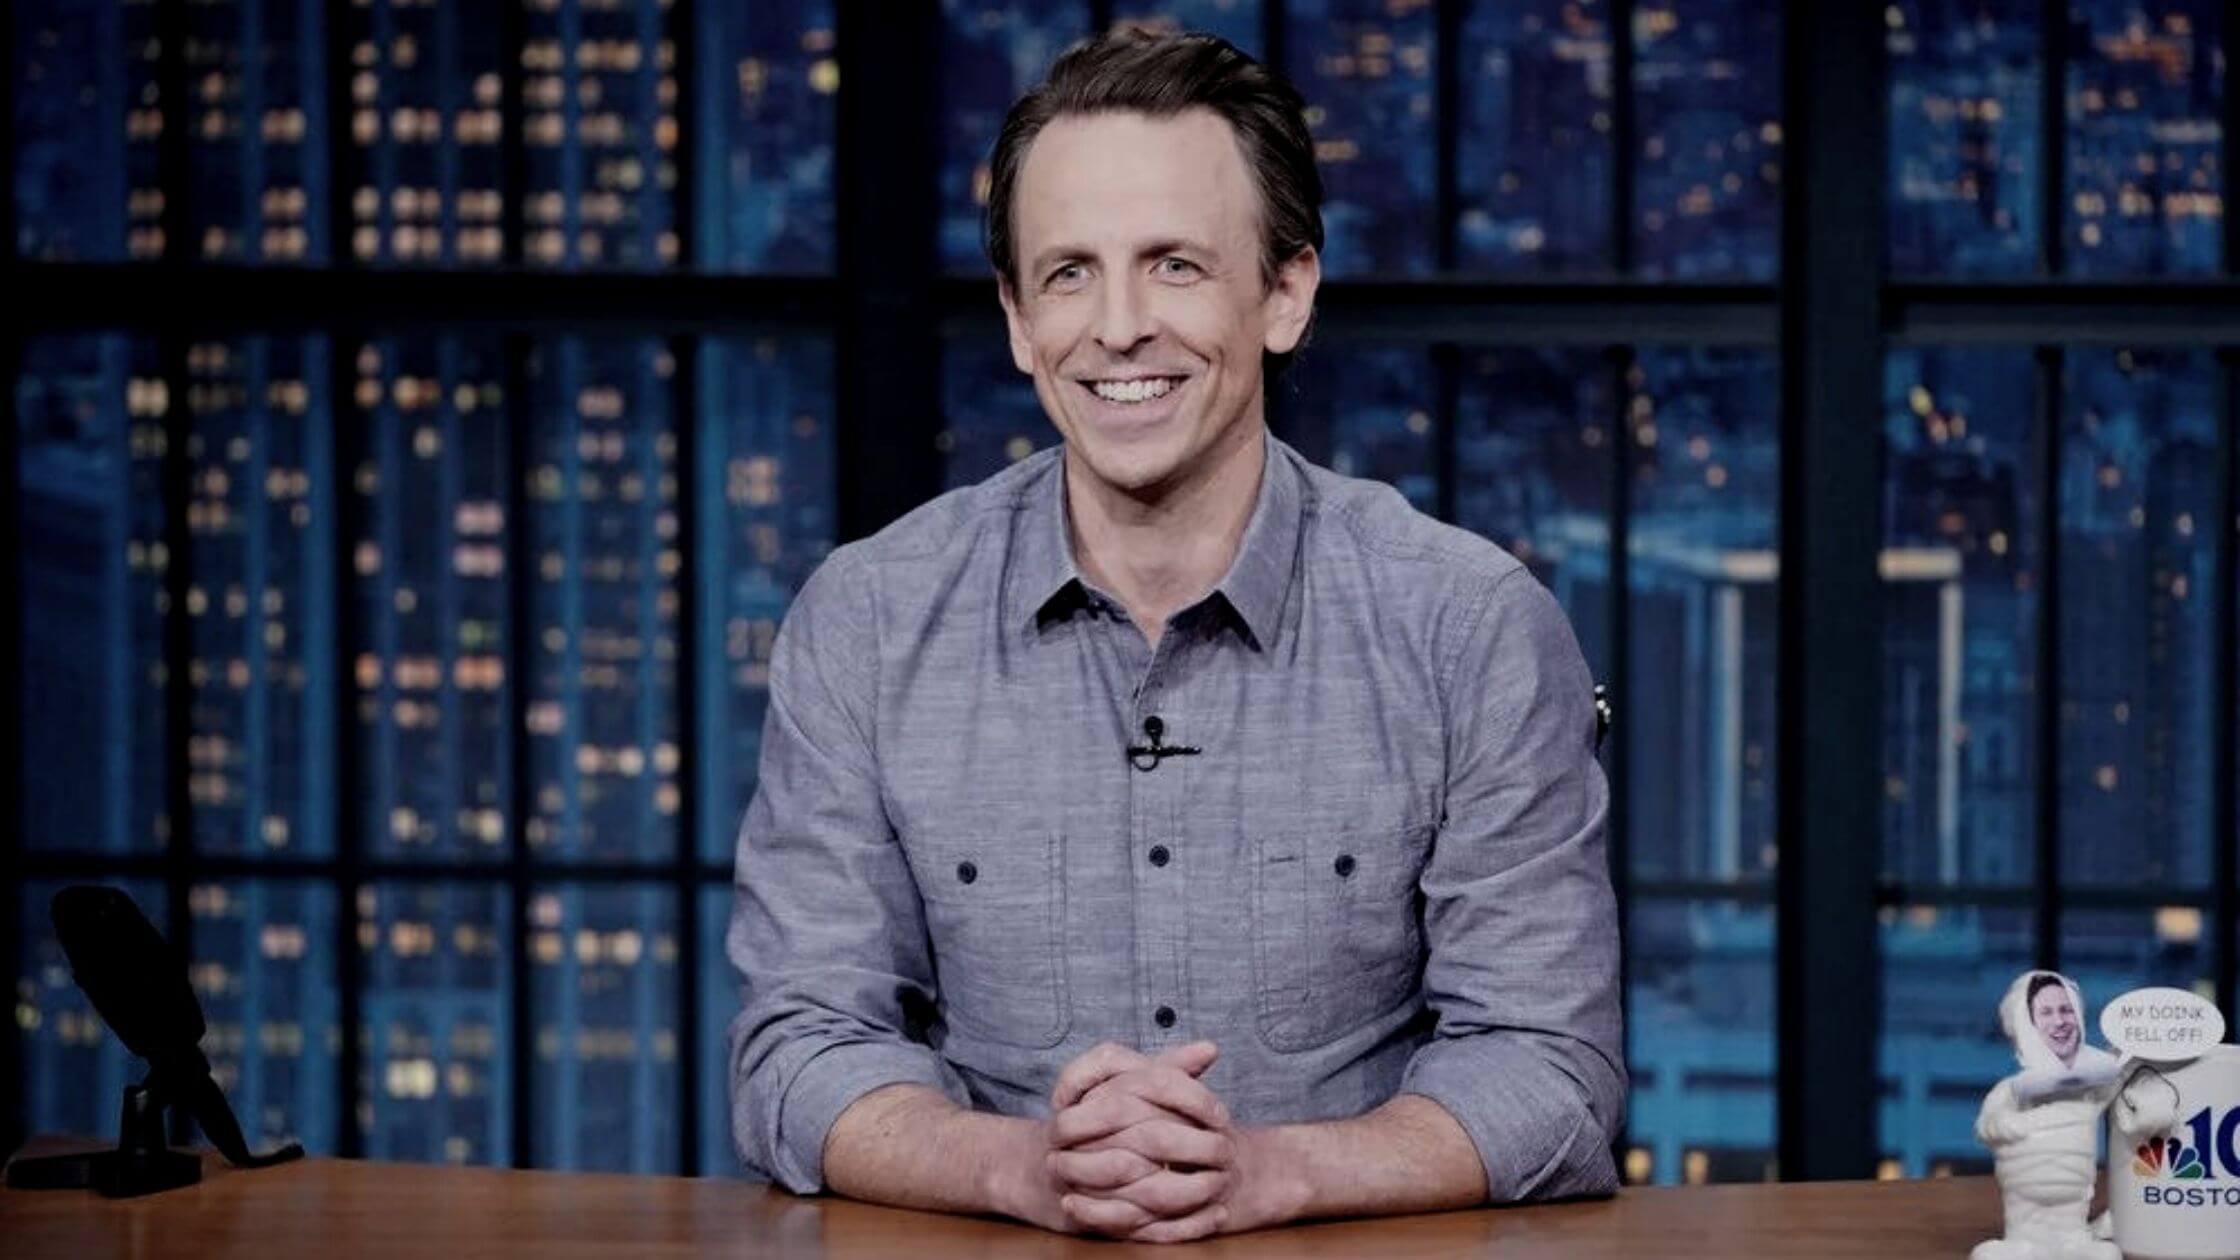 Late Night With Seth Meyers Season 9 episodes have aired.